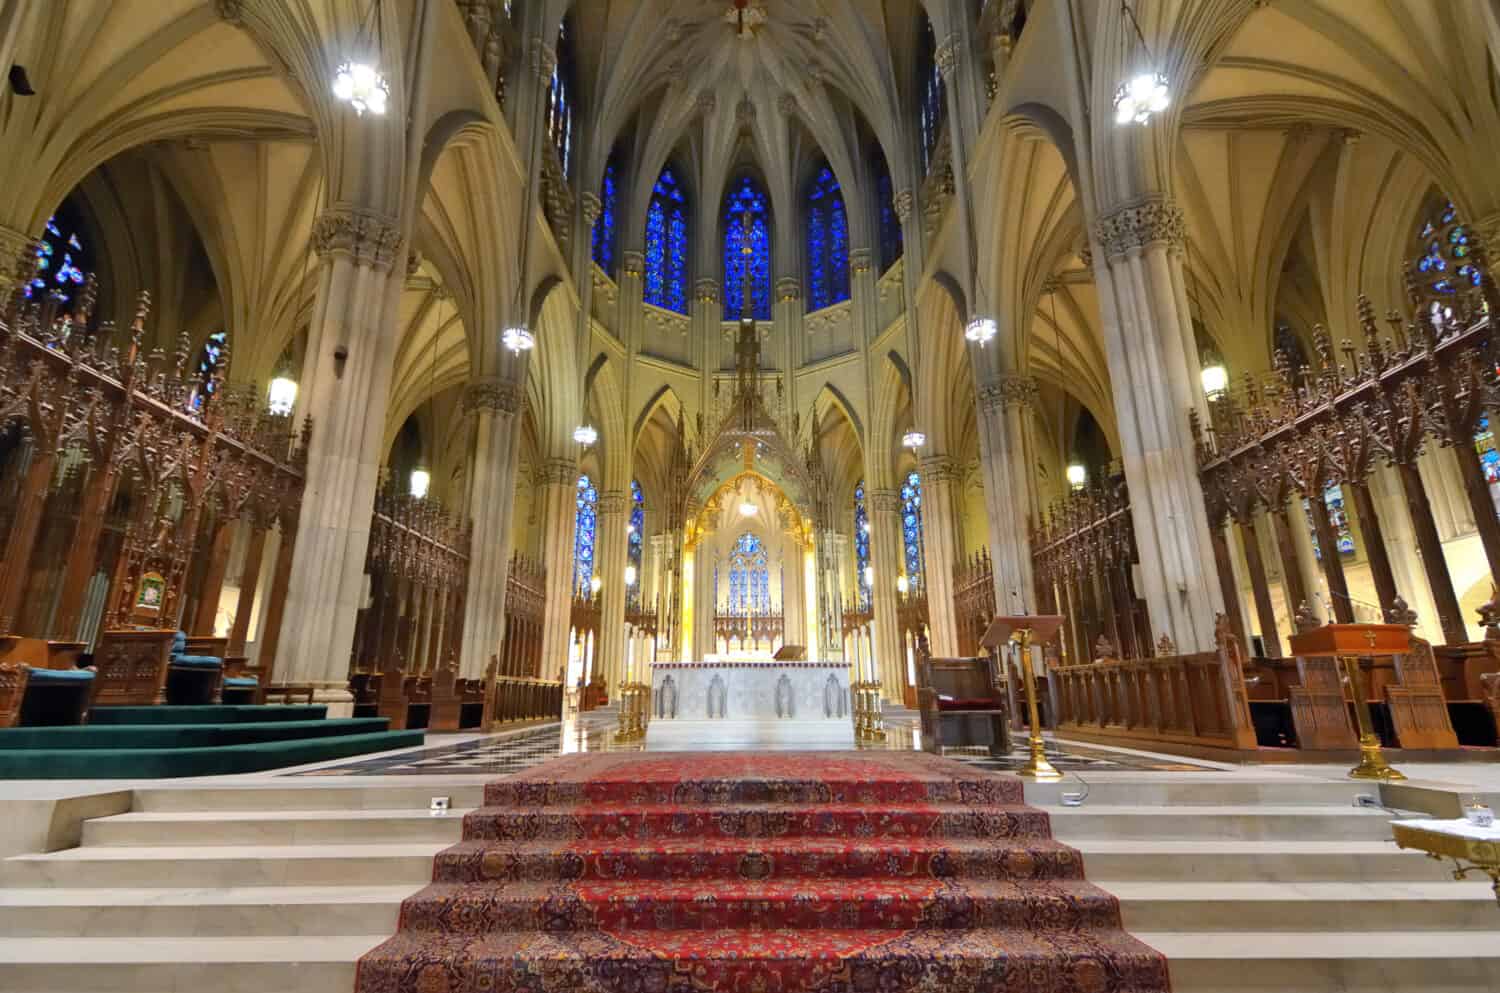 Interior of St. Patrick's Cathedral, a famed neogothic Roman Catholic Cathedral in New York City.